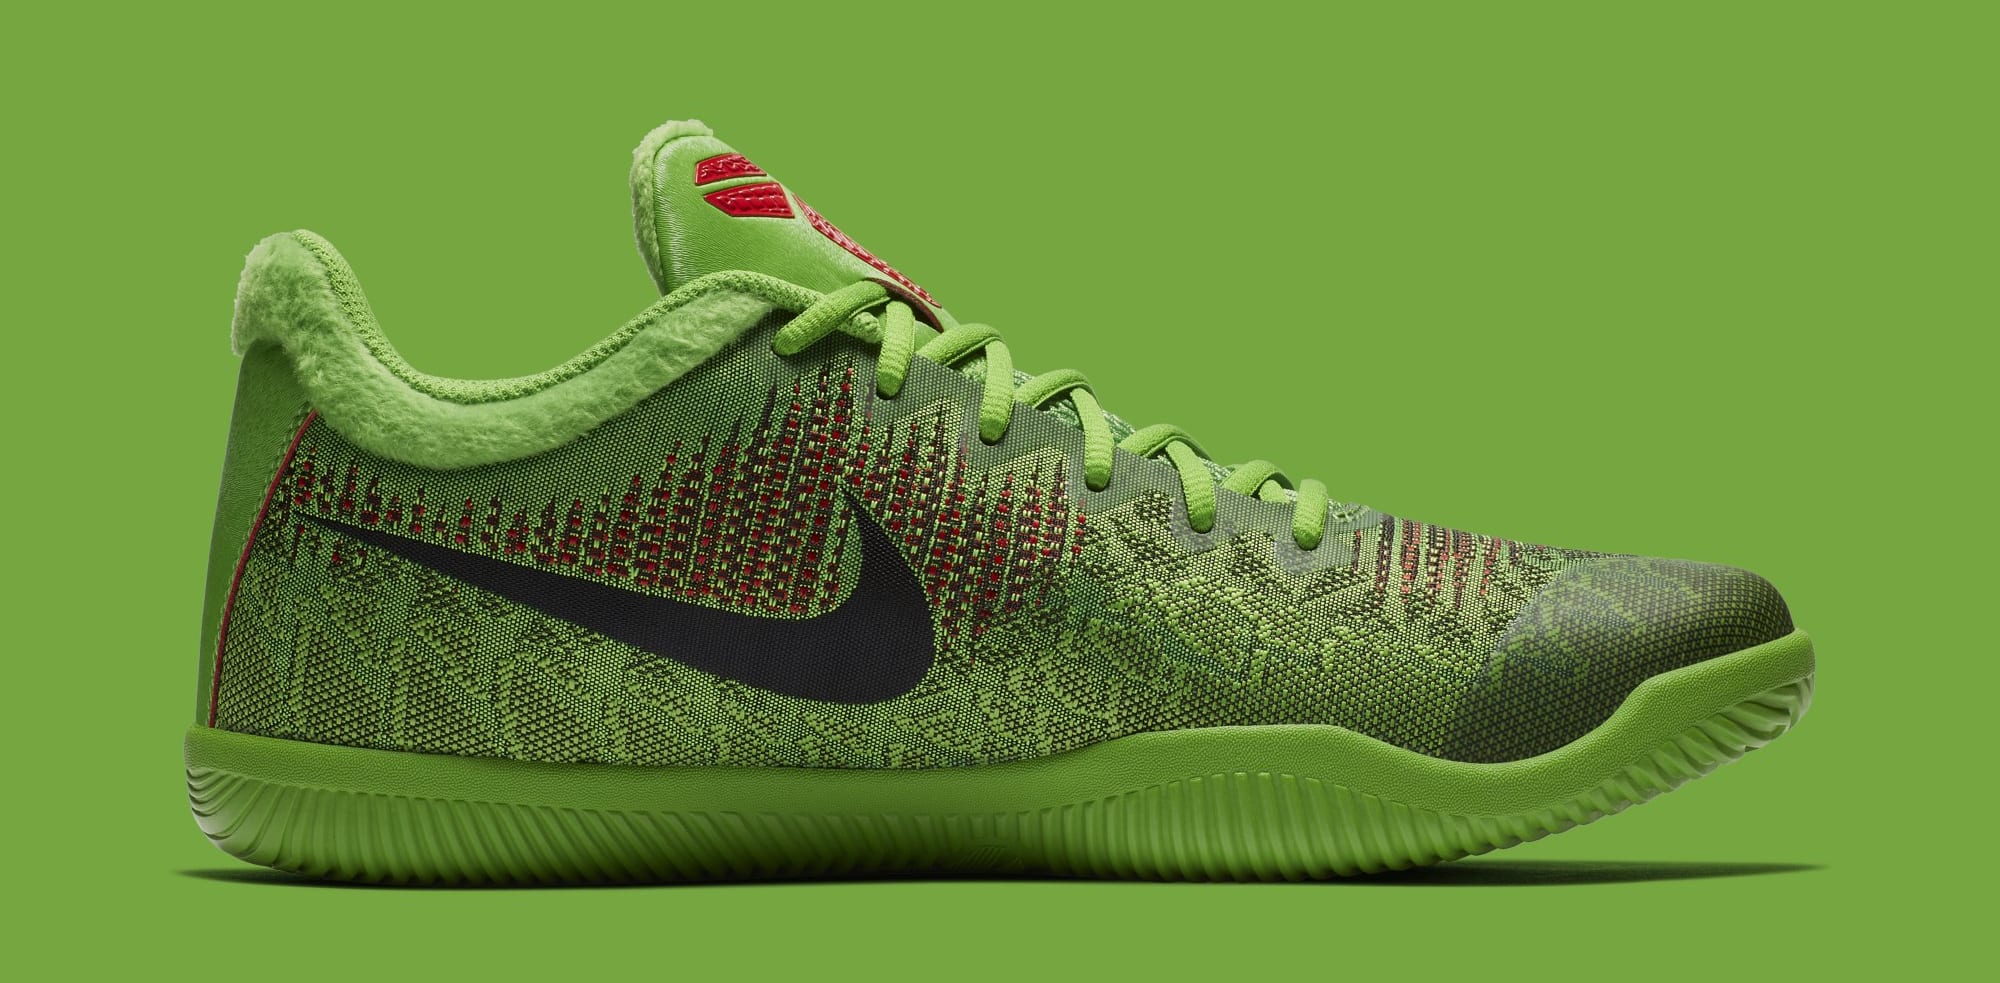 New Kobes Get the 'Grinch' Treatment Complex